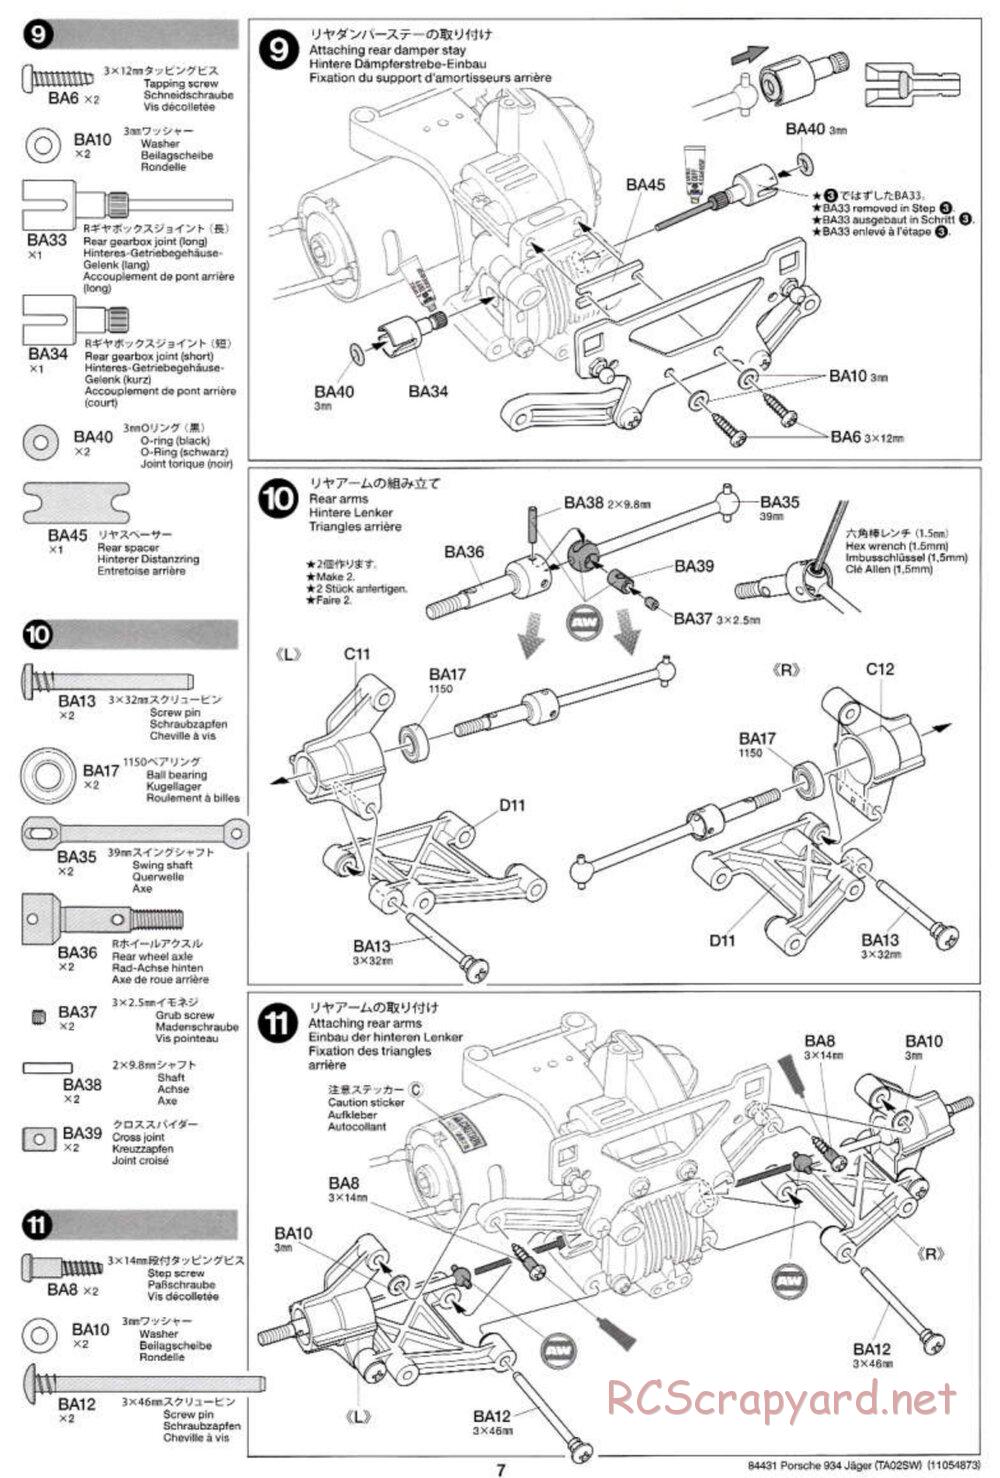 Tamiya - Porsche Turbo RSR Type 934 Jagermeister - TA-02SW Chassis - Manual - Page 7